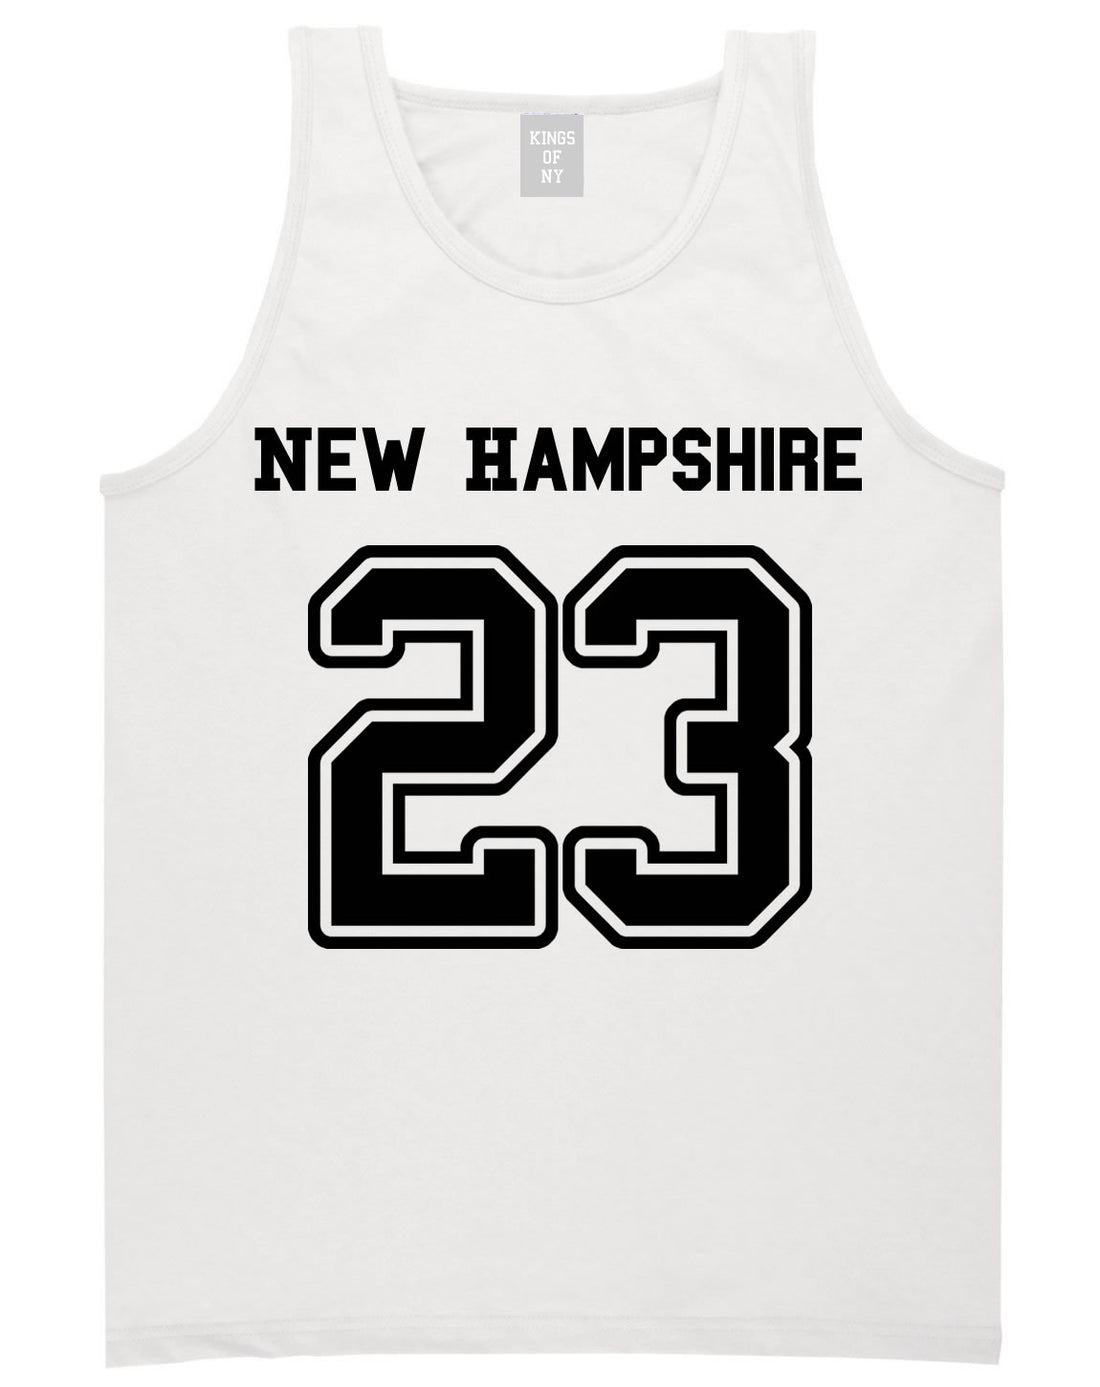 Sport Style New Hampshire 23 Team State Jersey Mens Tank Top By Kings Of NY